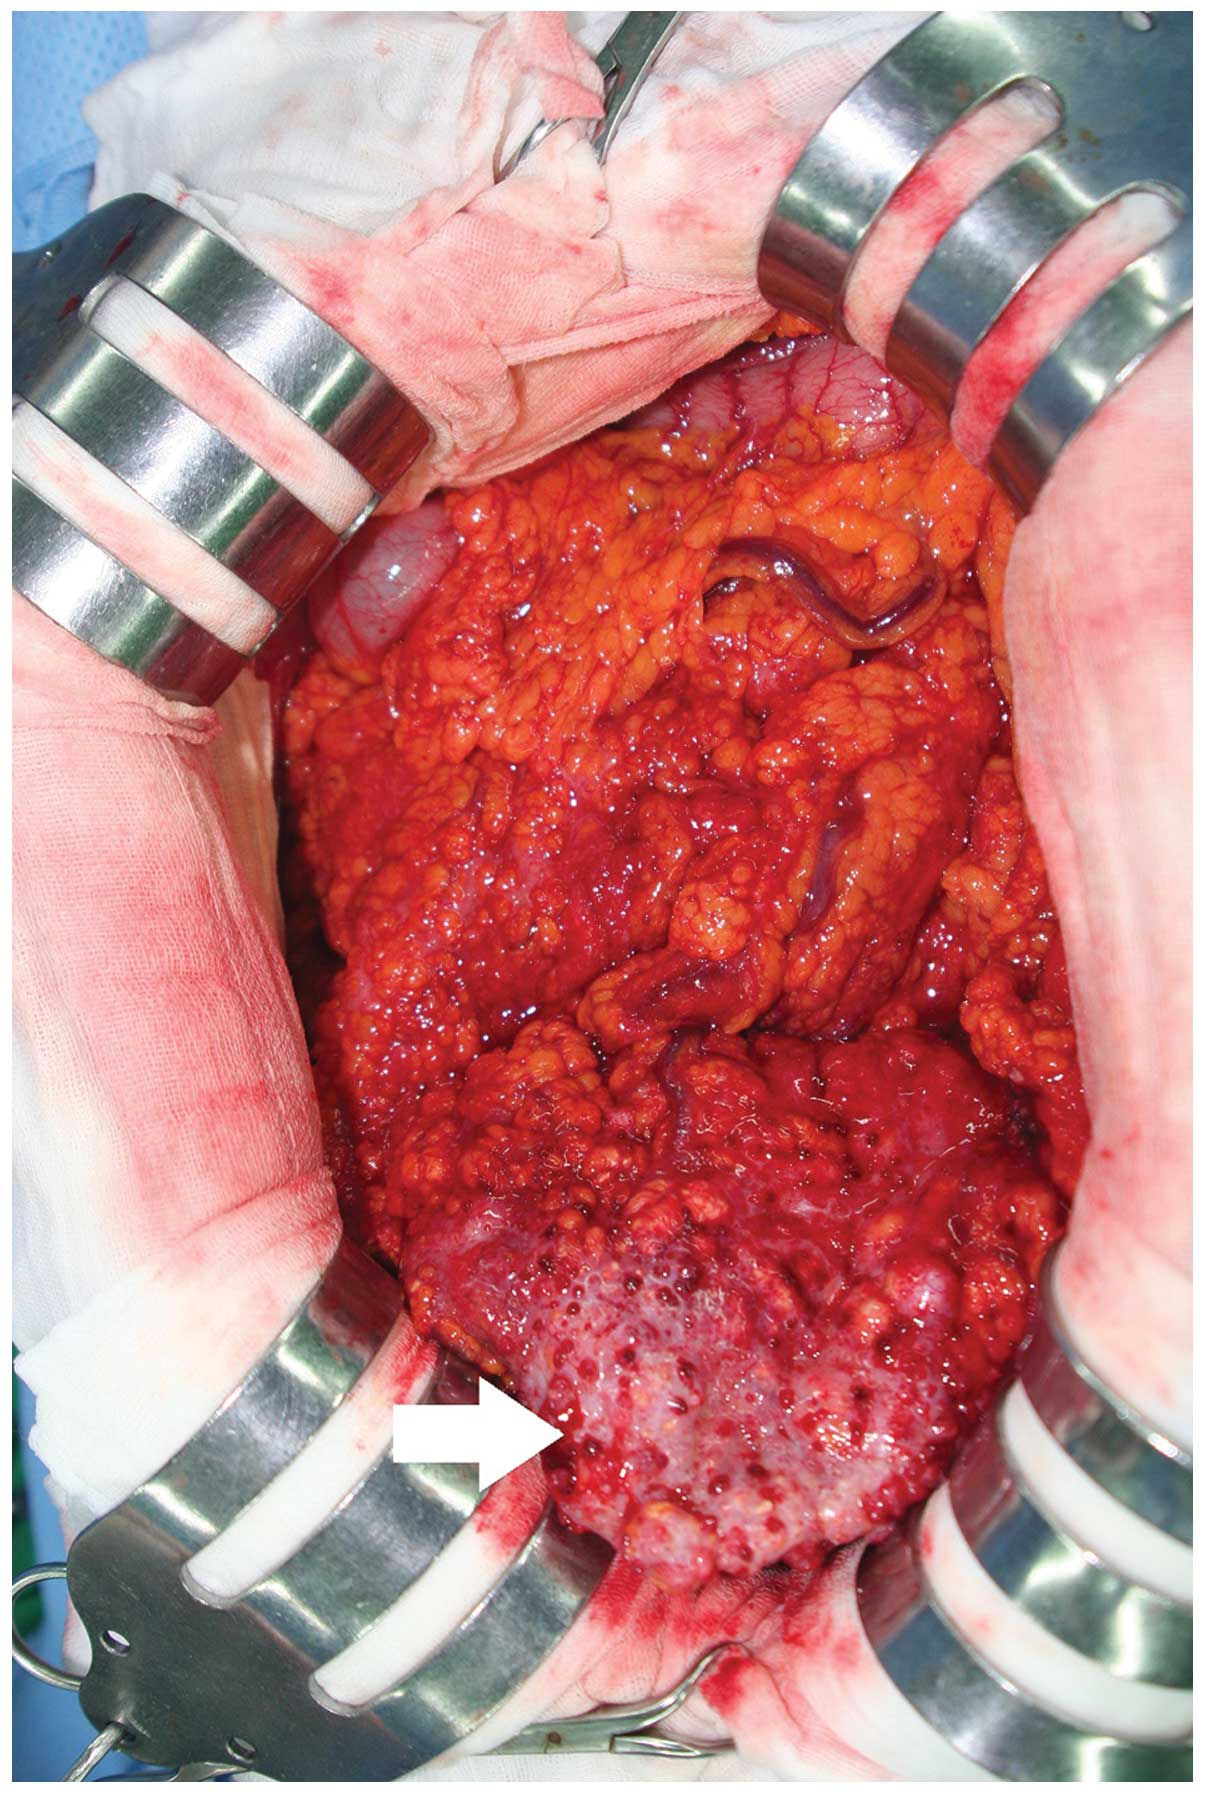 Primary peritoneal serous carcinoma, an extremely rare malignancy: A case report and review of 